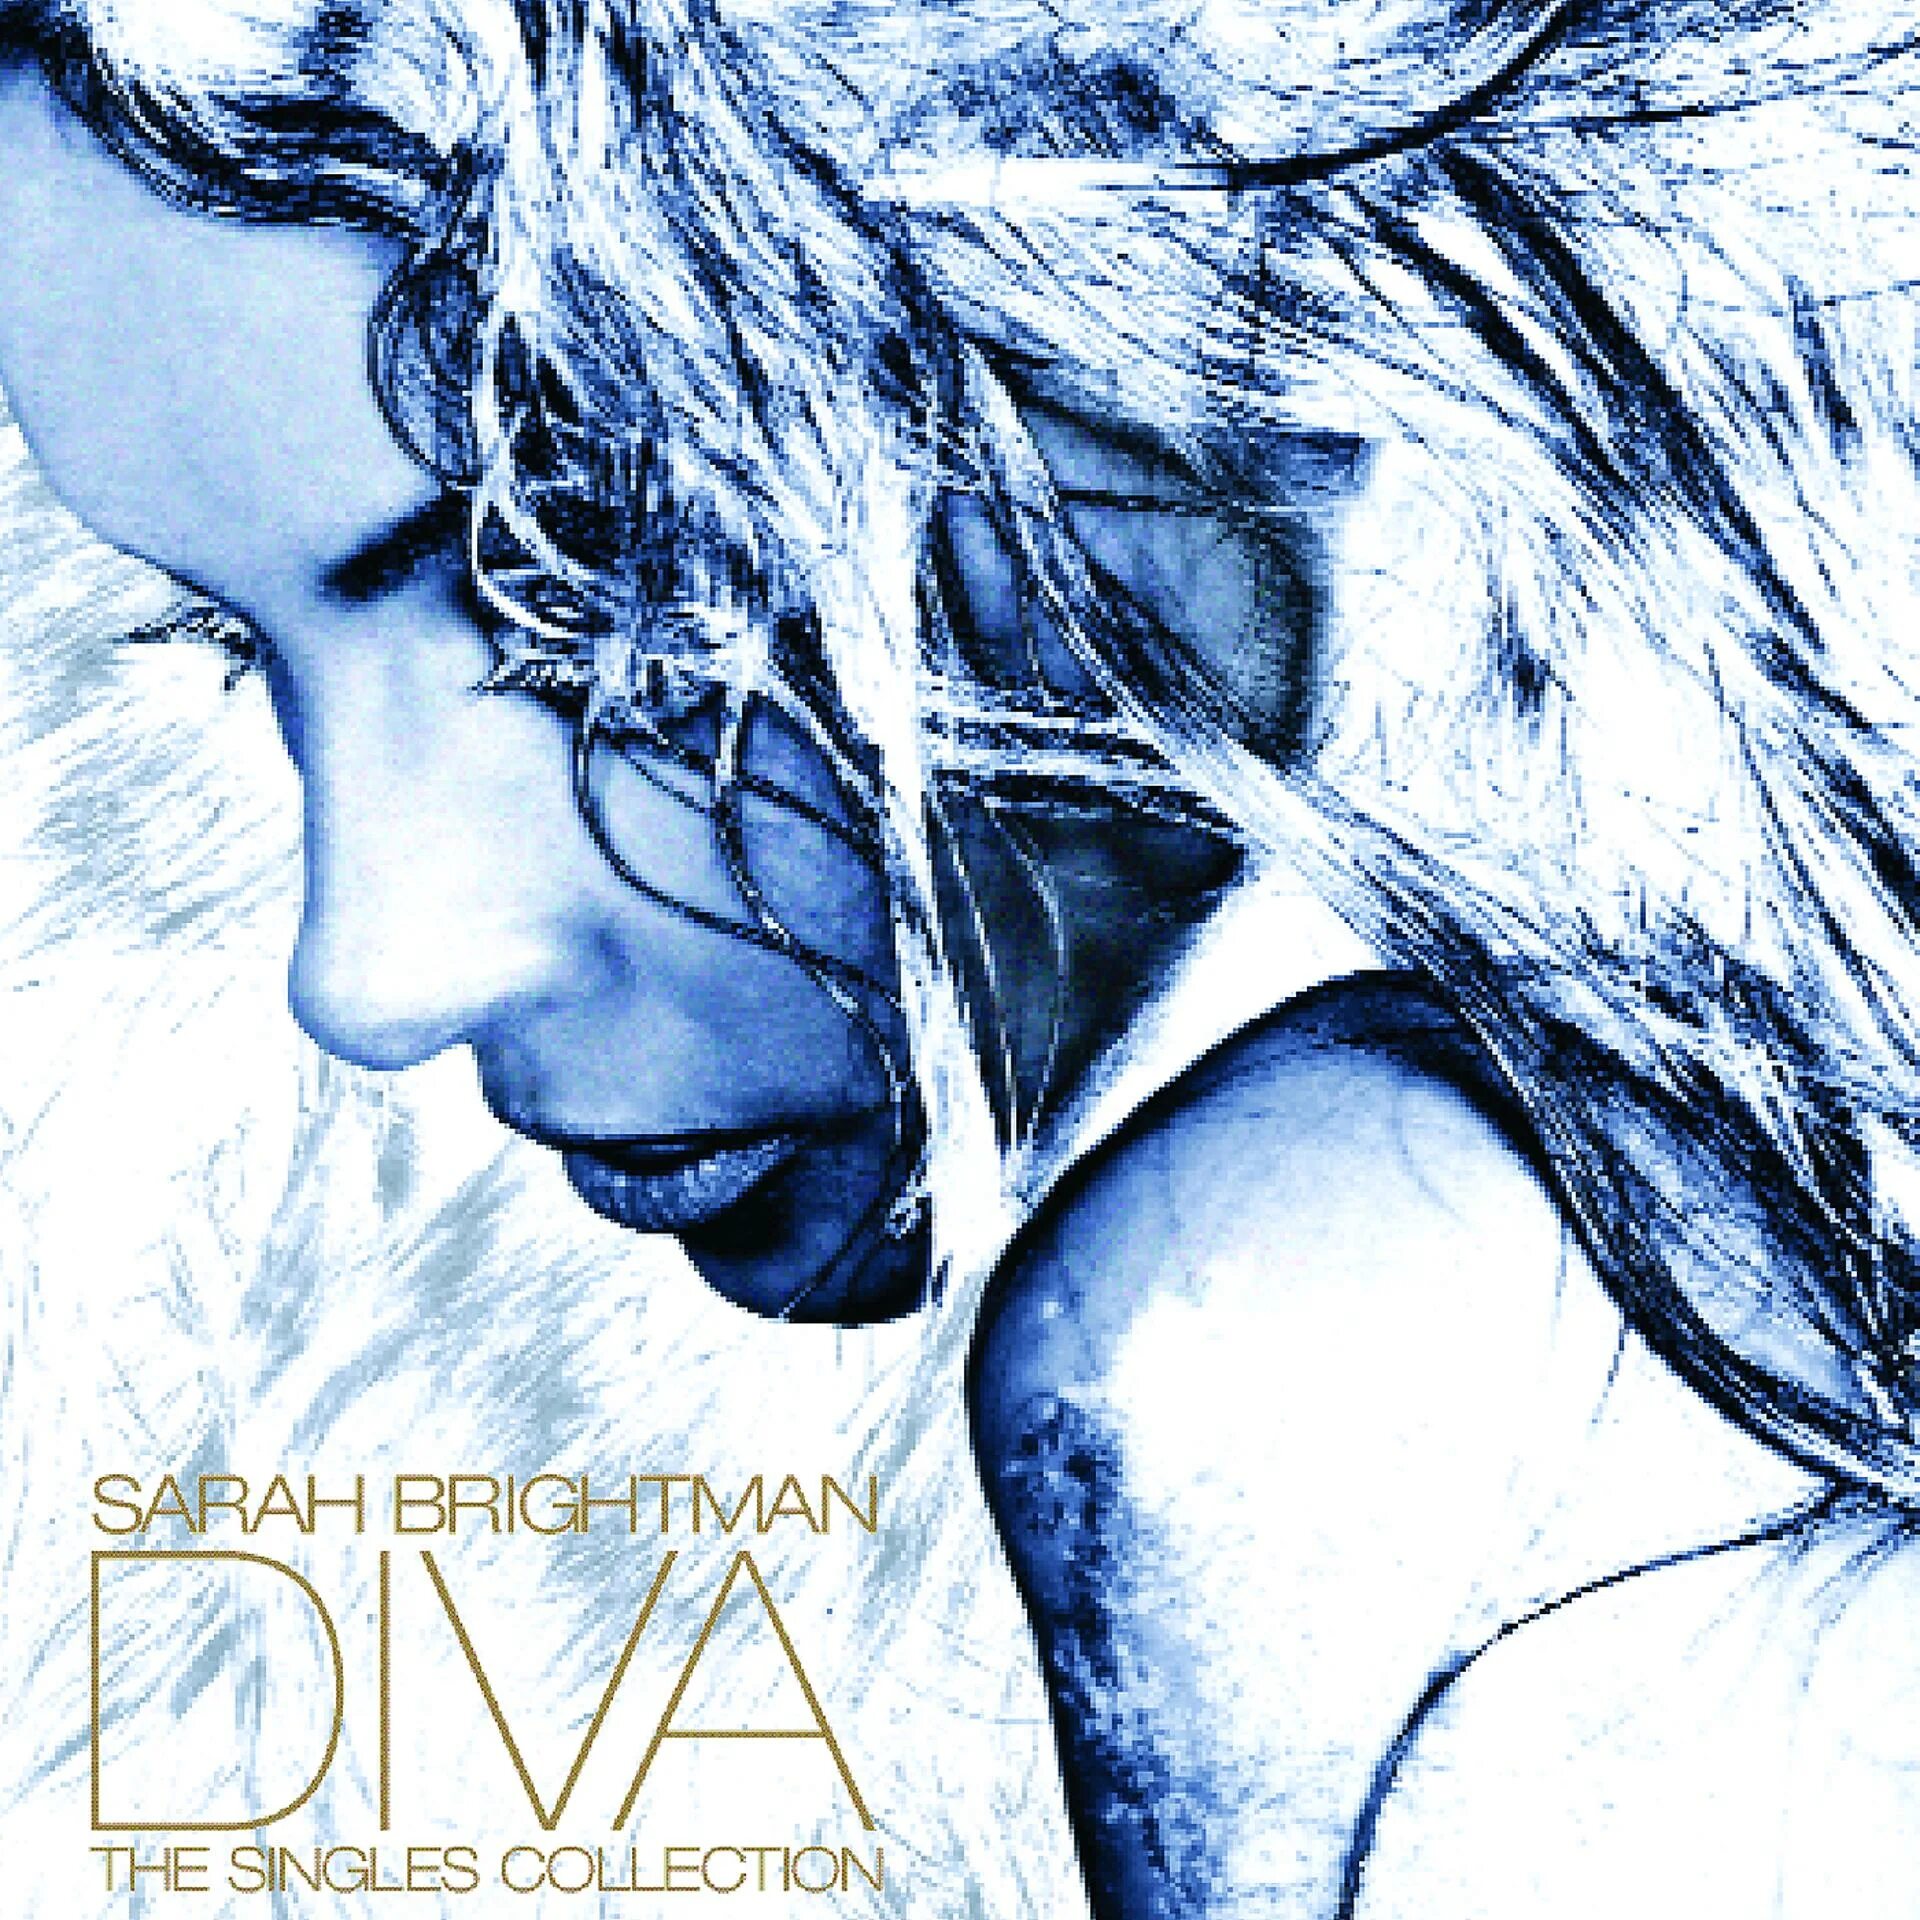 Sarah Brightman Diva. Sarah Brightman в 2008. Sarah Brightman Dive 1993. Sarah Brightman - Diva - the Singles collection. Sarah wants to